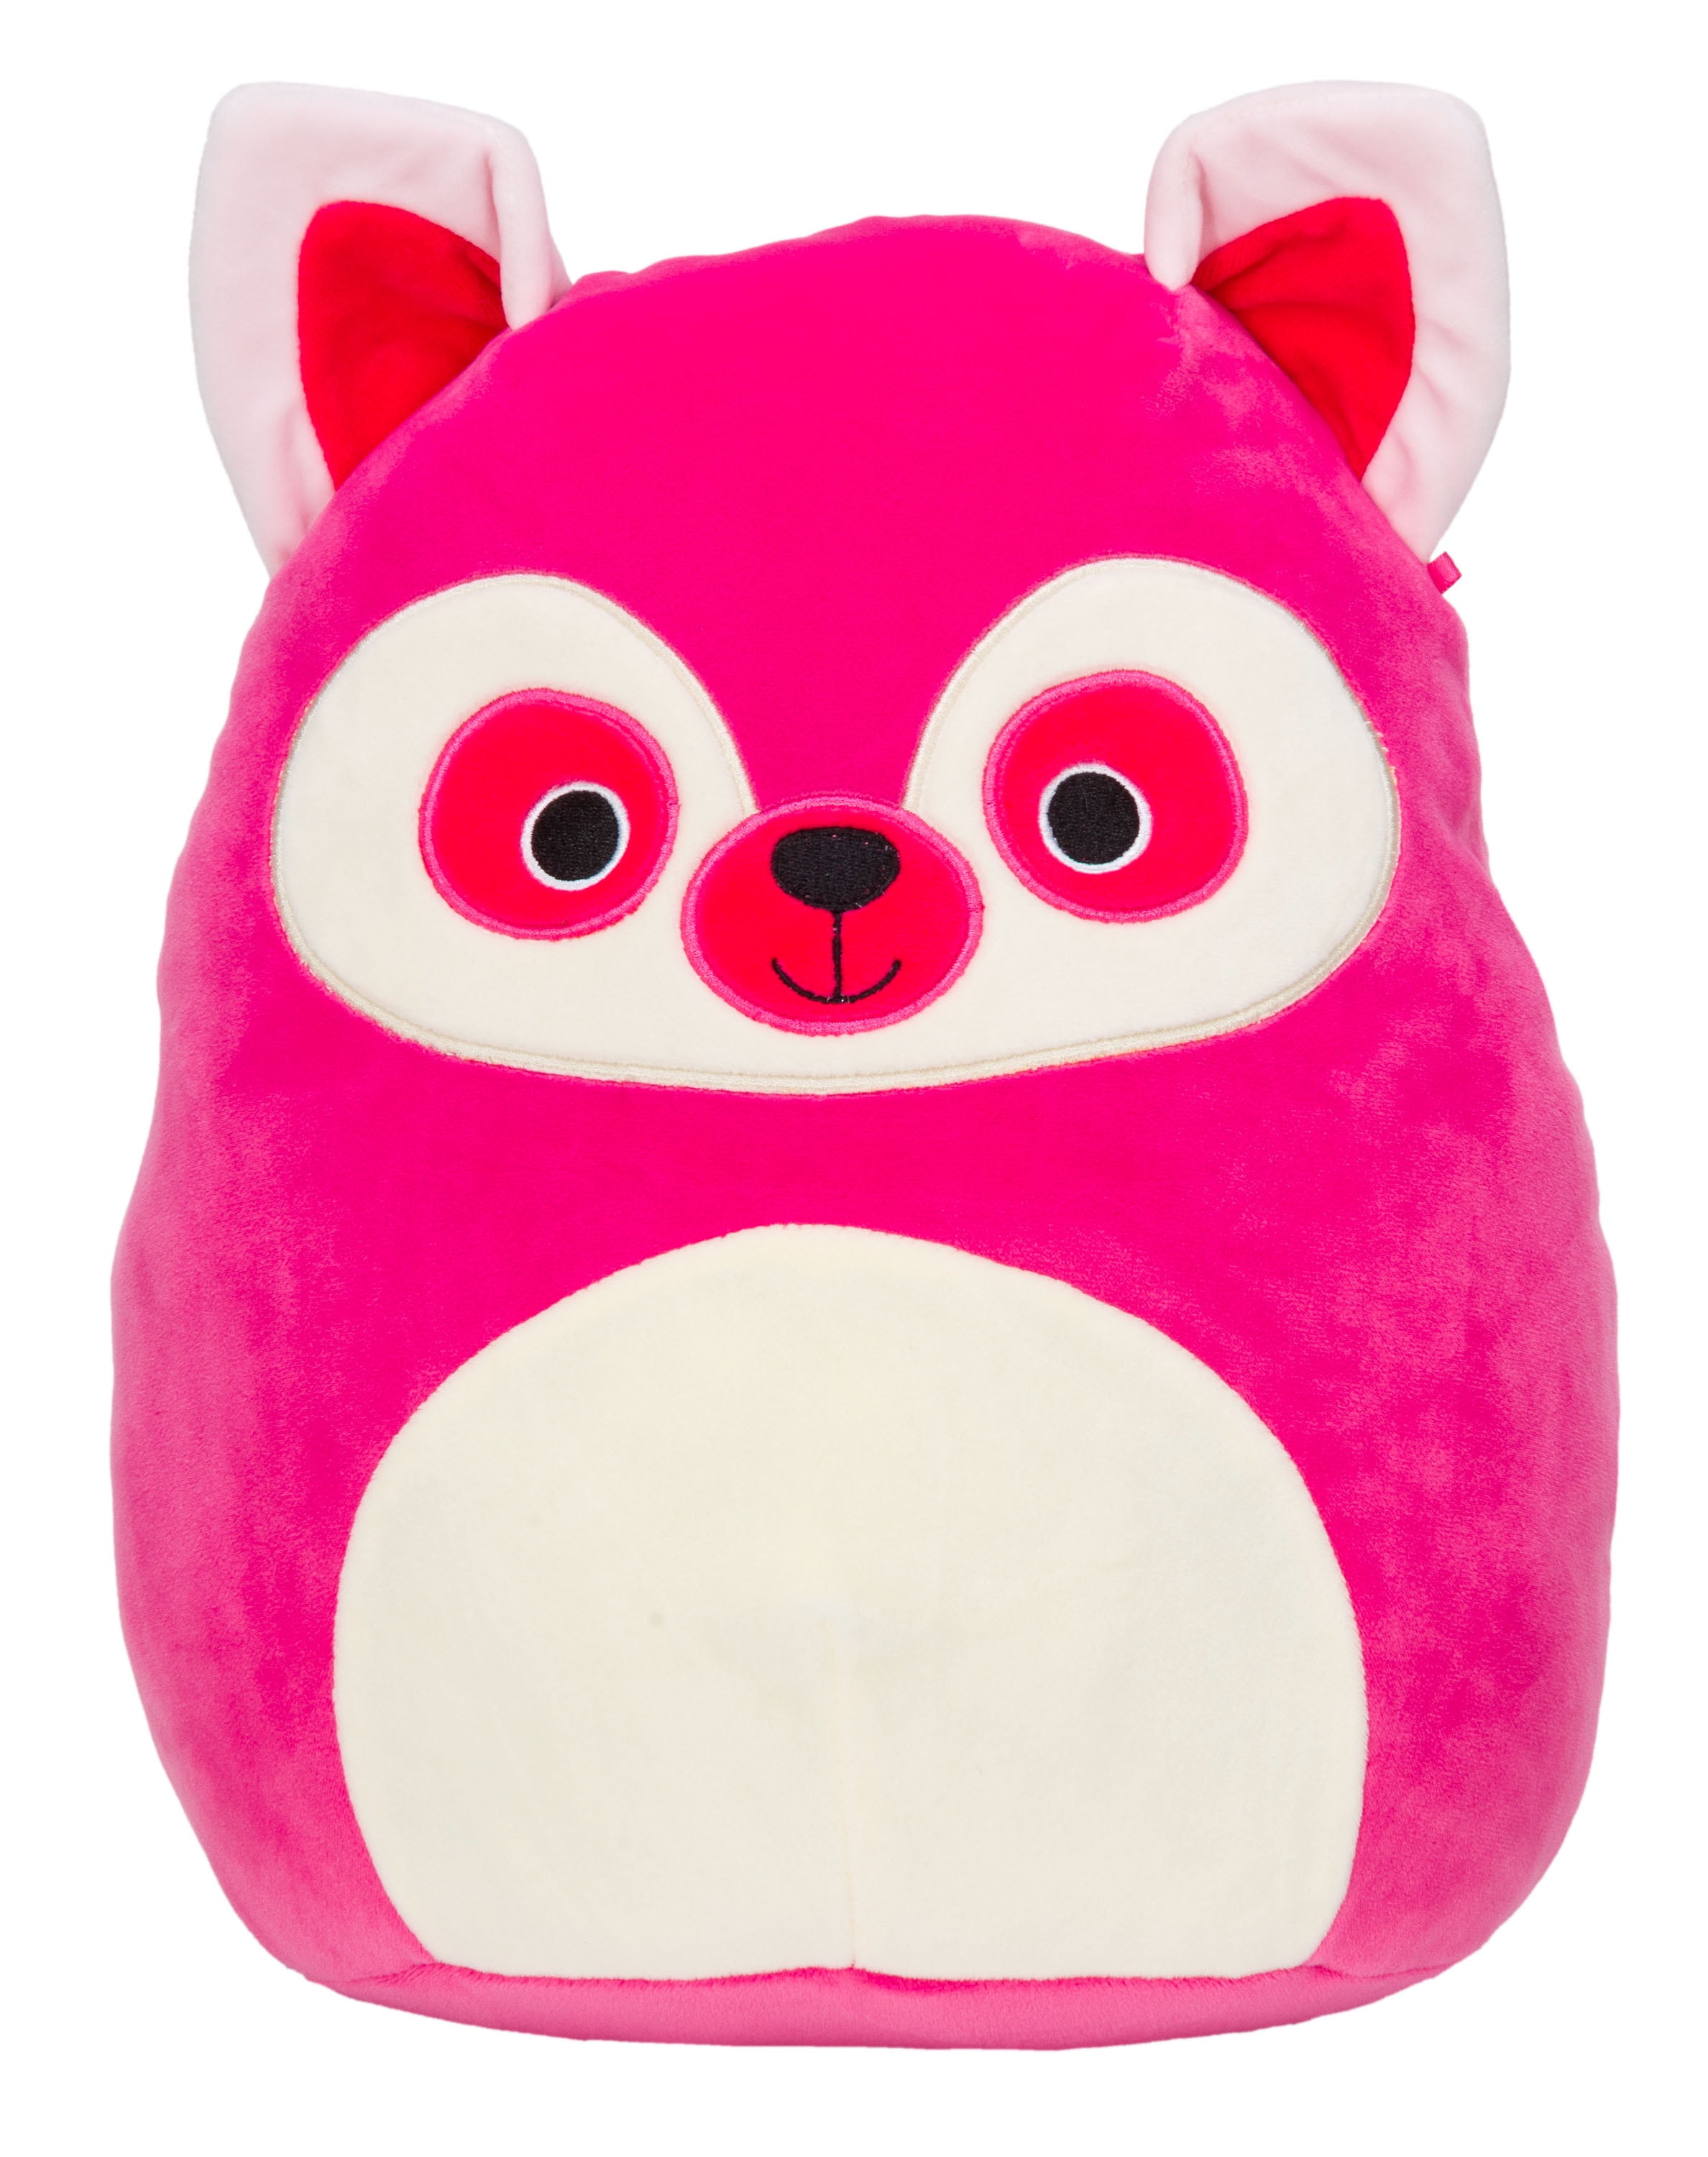 Squishmallow Courtney Caticorn Cat 8" 2021 Kellytoy Plush for sale online 